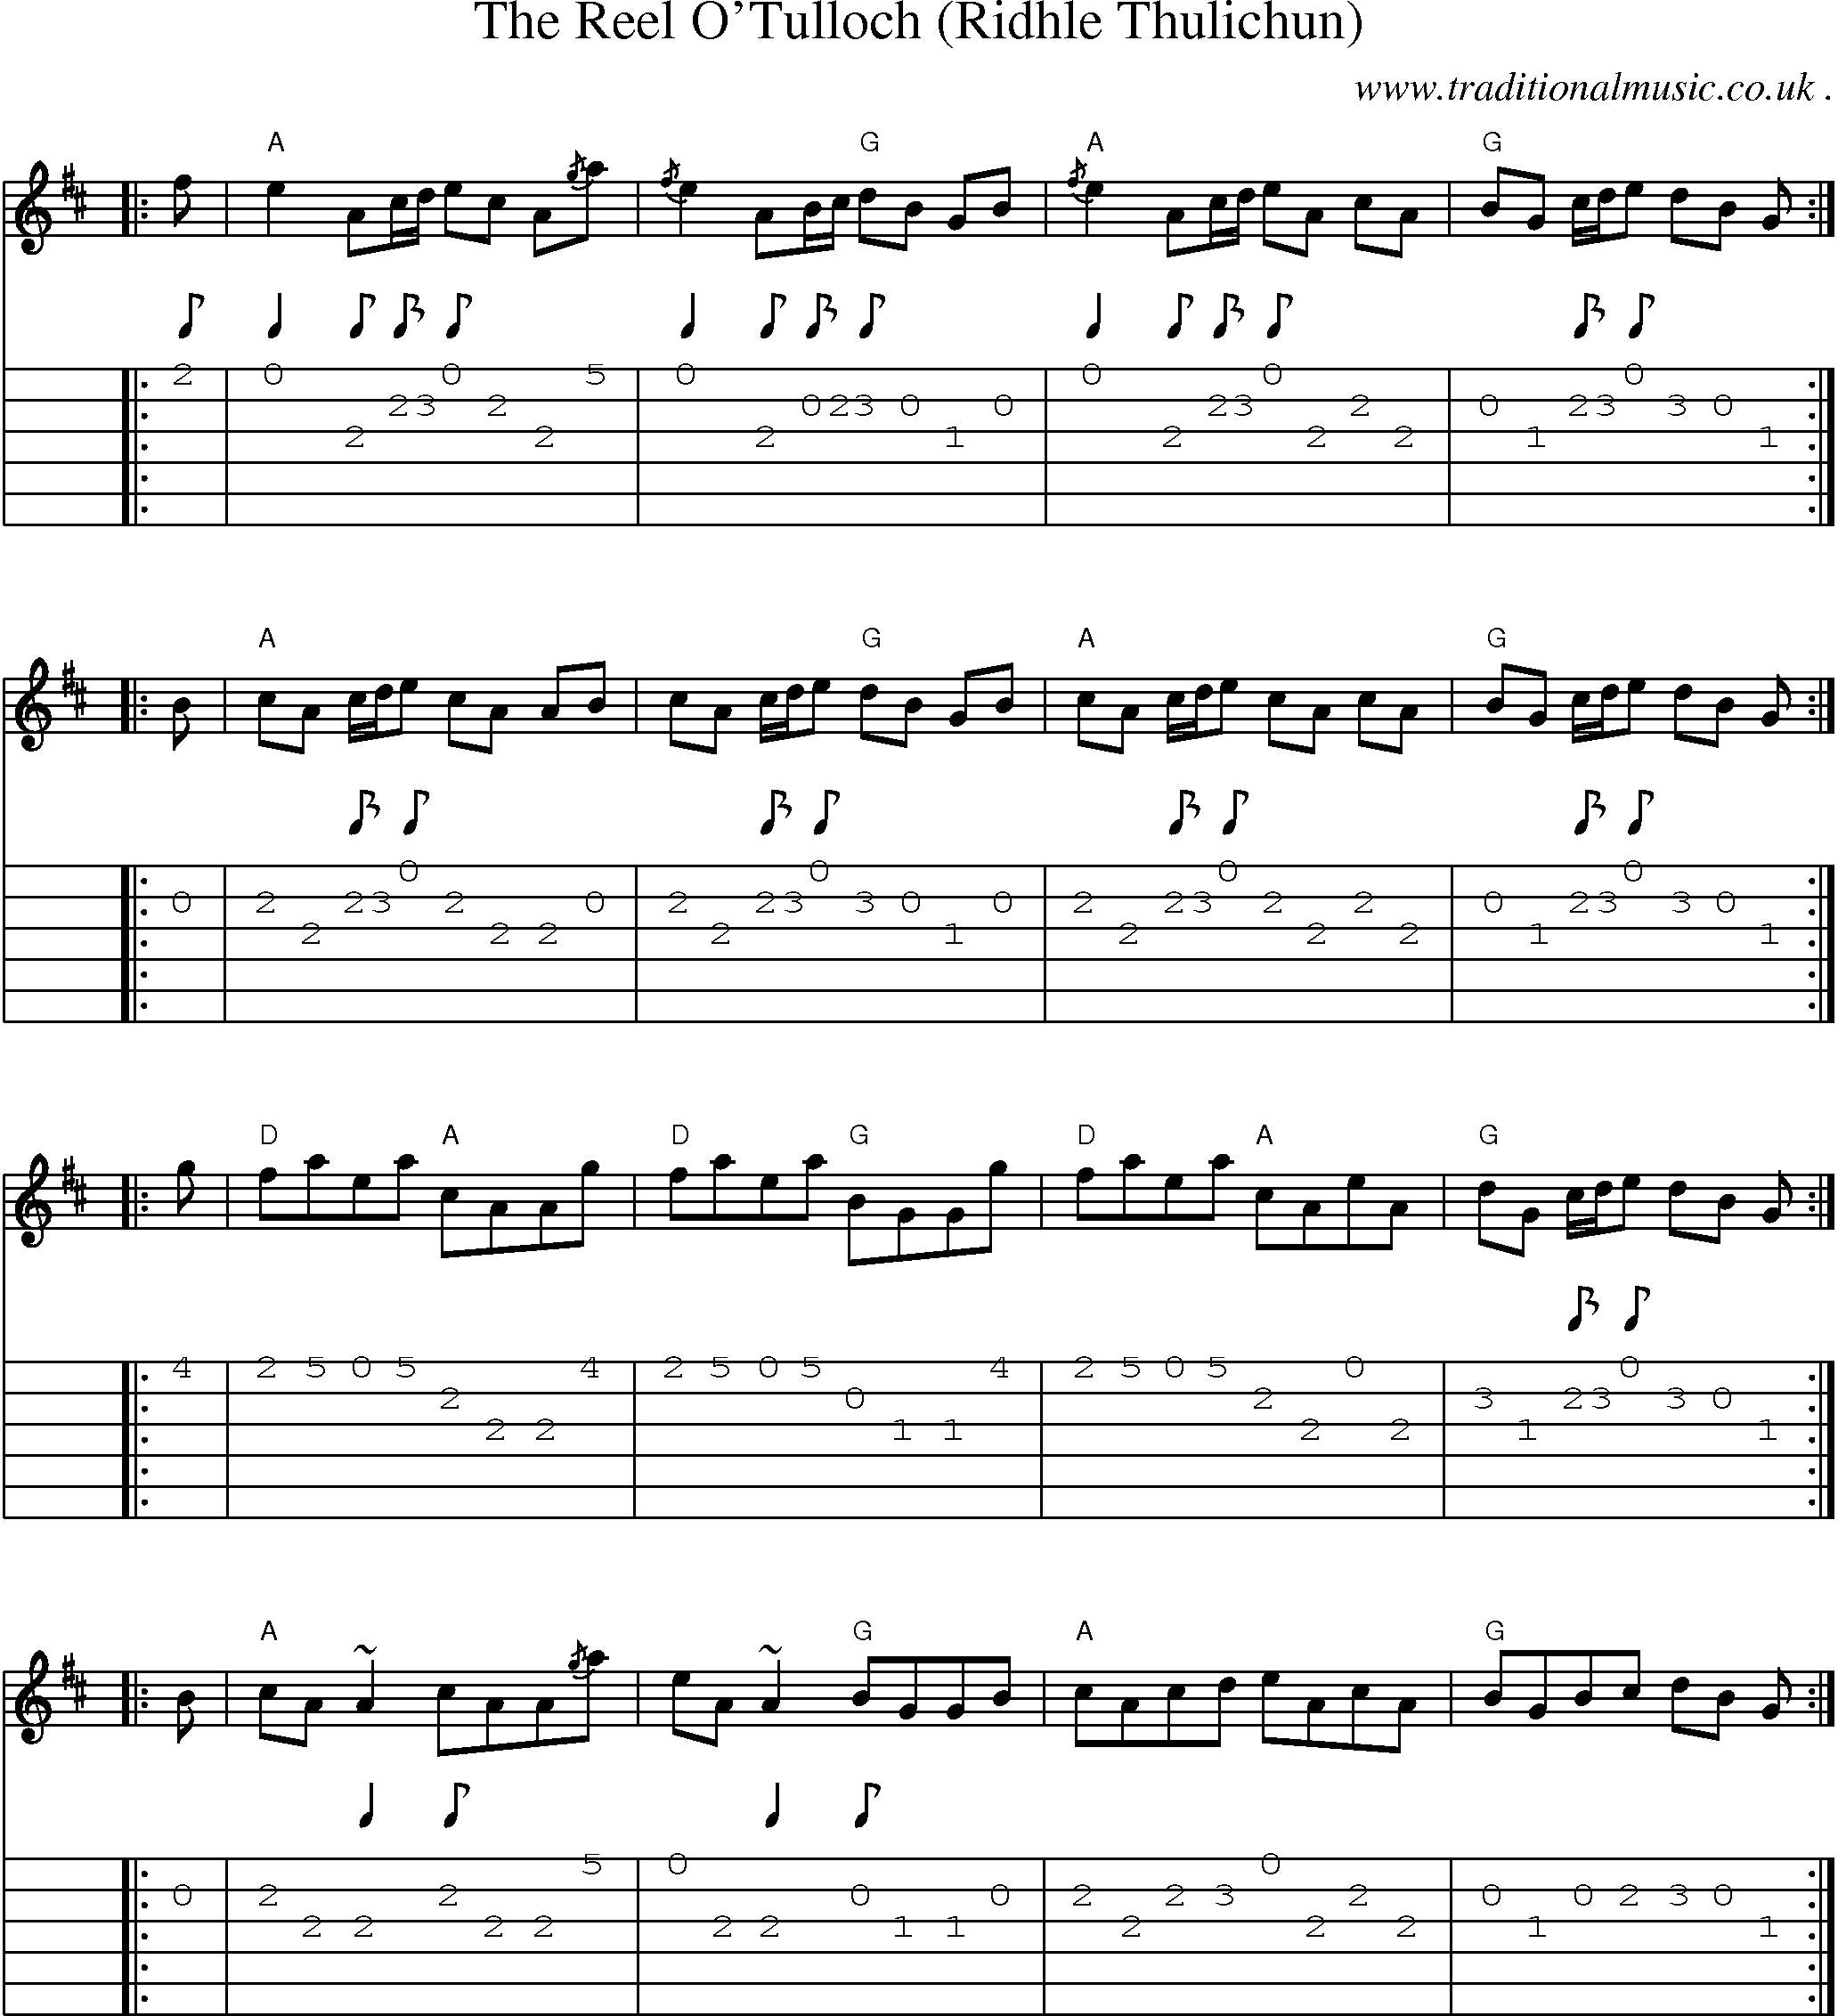 Sheet-music  score, Chords and Guitar Tabs for The Reel Otulloch Ridhle Thulichun